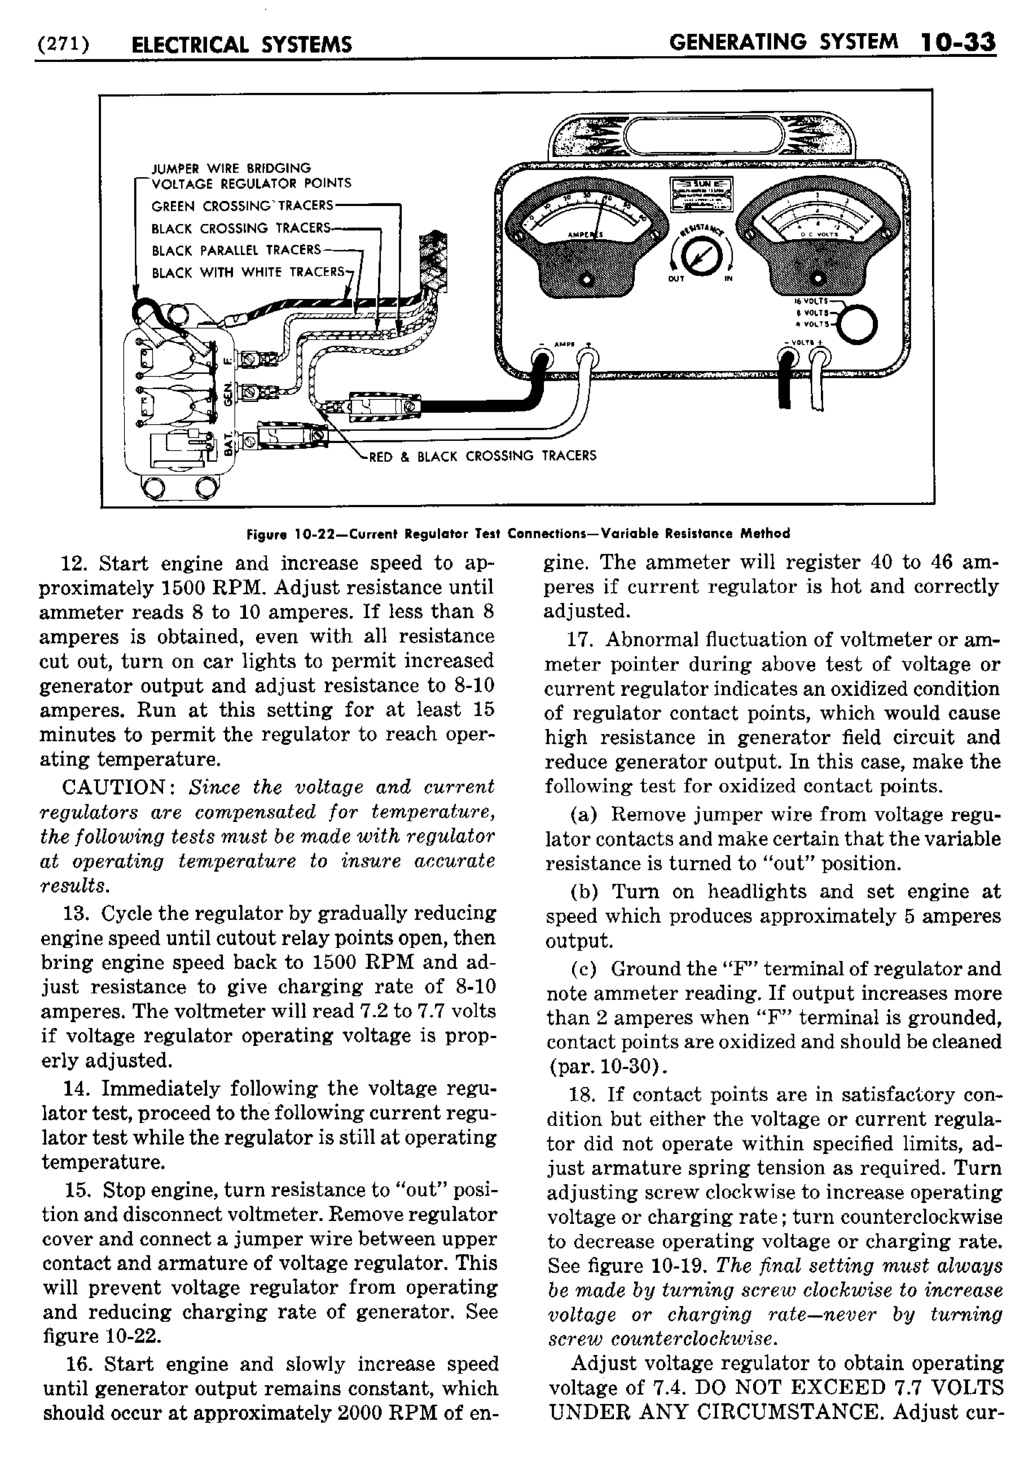 n_11 1950 Buick Shop Manual - Electrical Systems-033-033.jpg